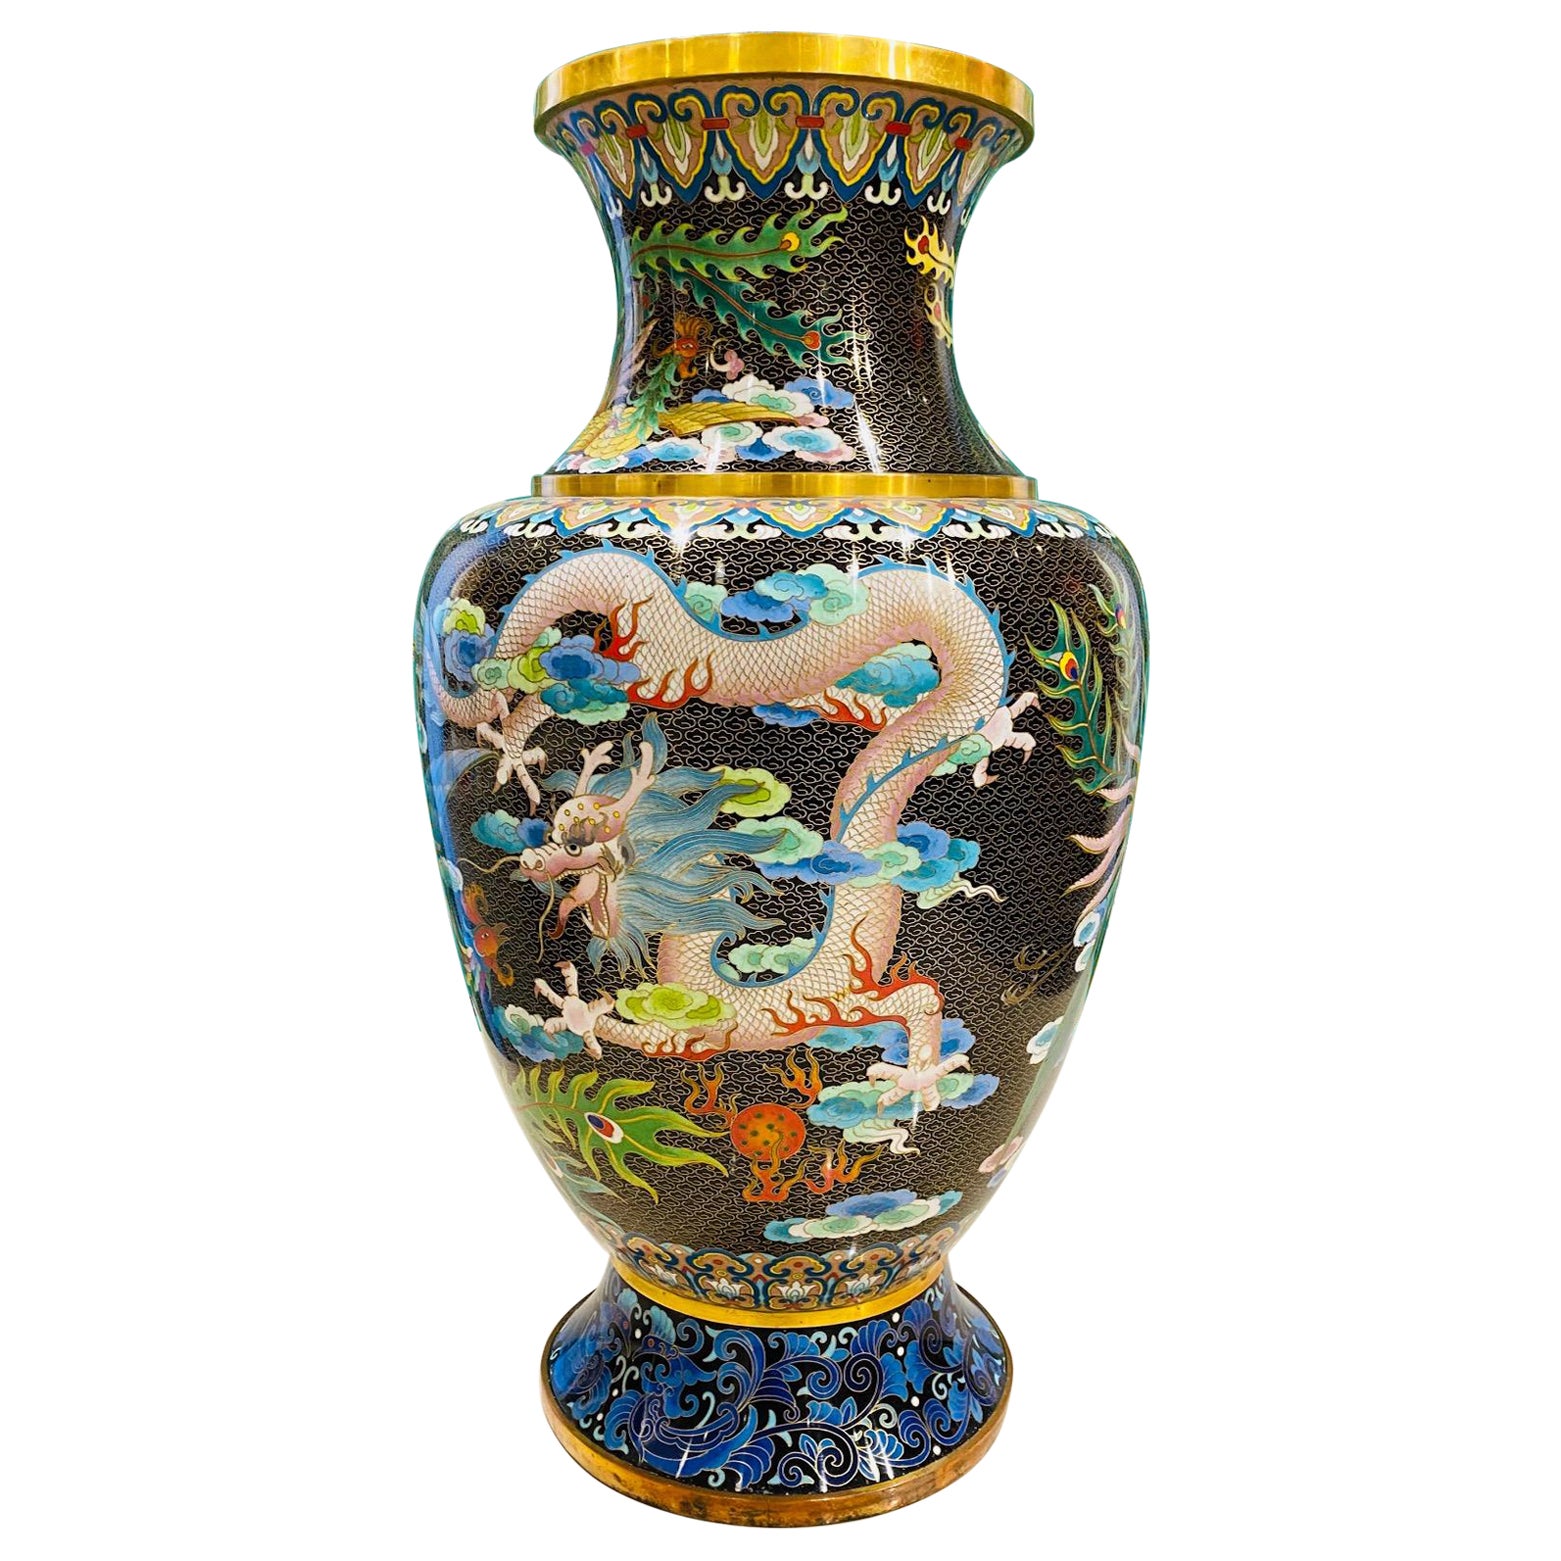 Vintage Chinese Cloisonné Vase with Dragon and Phoenix, c. 1940's